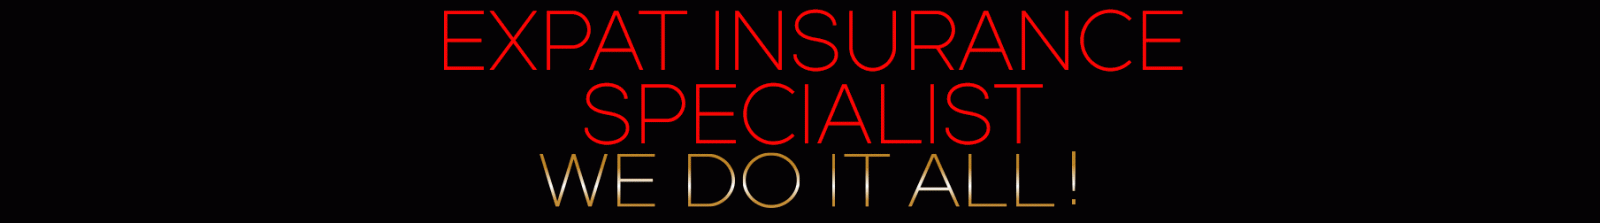 Get a quote for Health Insurance or any type of insurance in Spain for expats in English